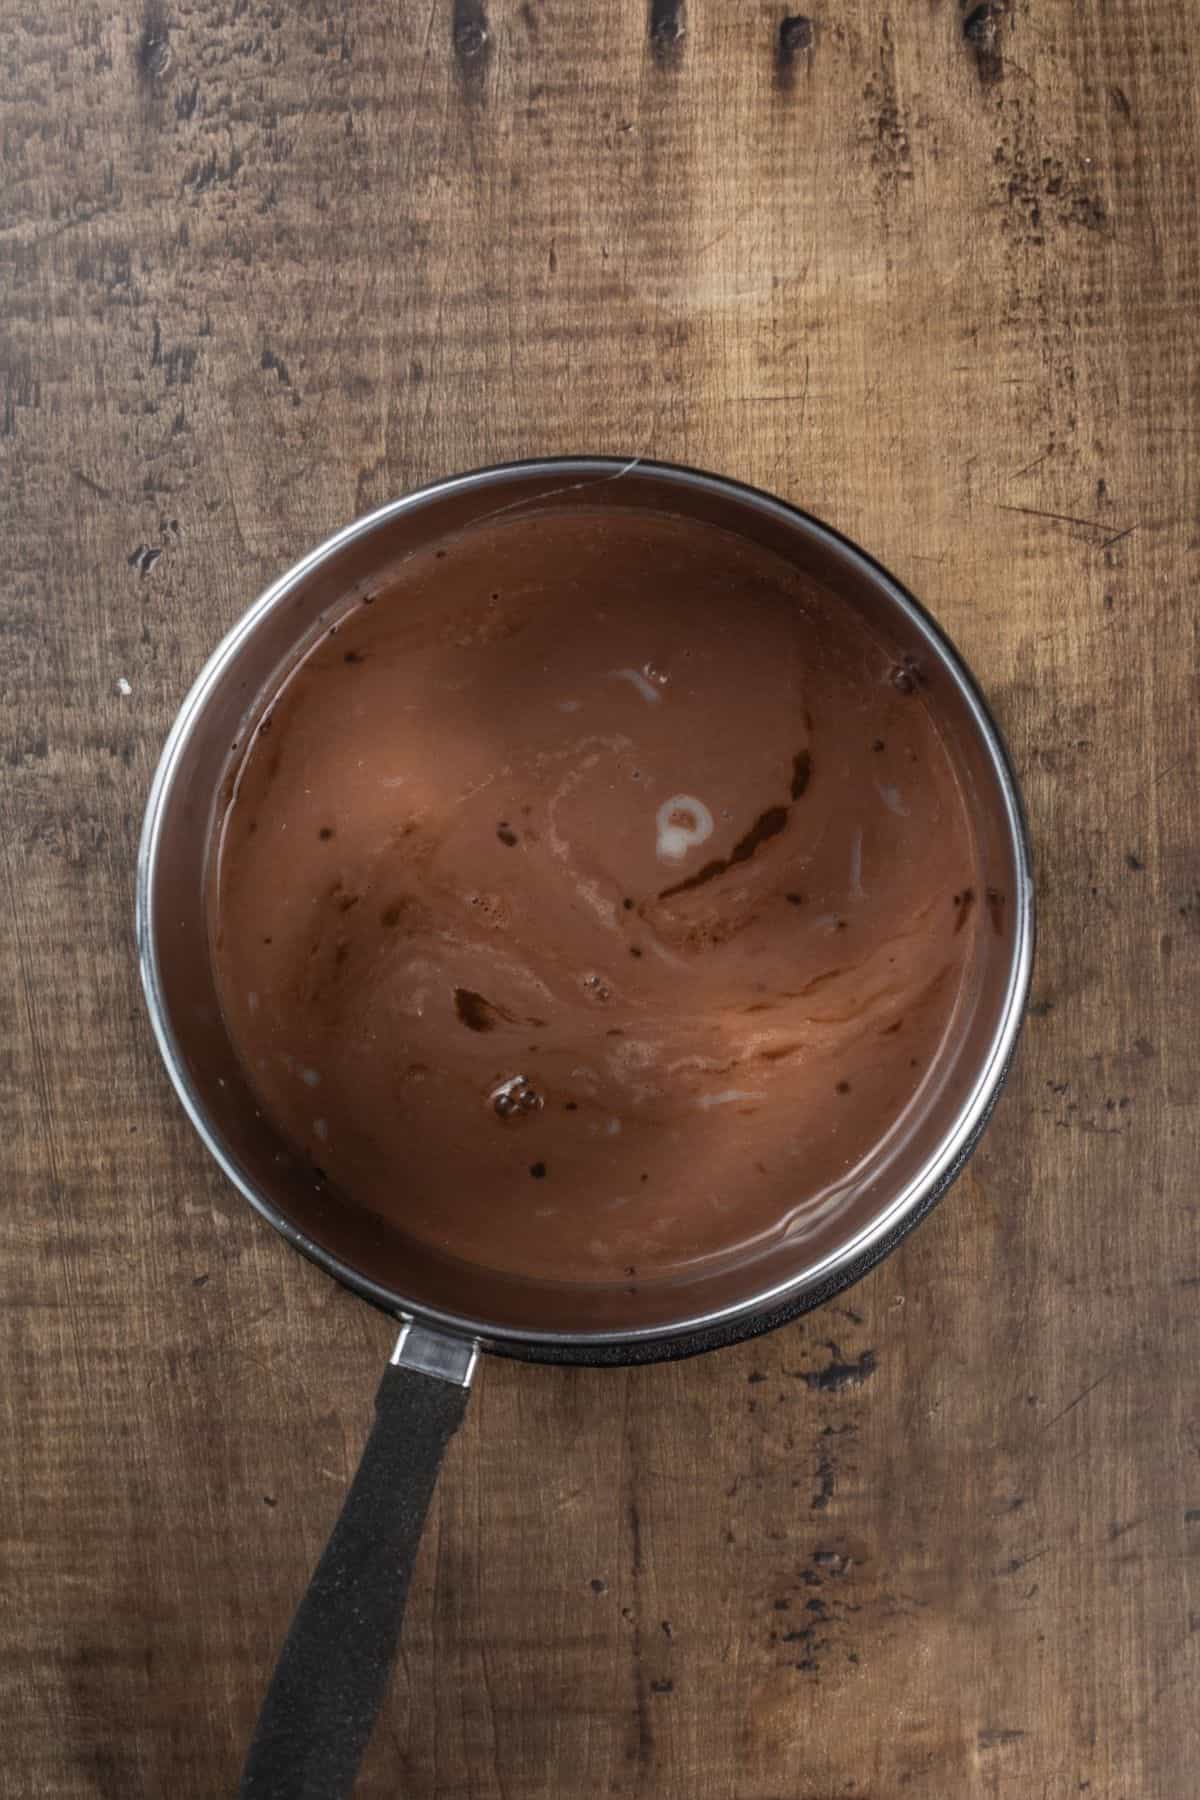 Chocolate pie filling before cooking in a silver pot on a wood table.